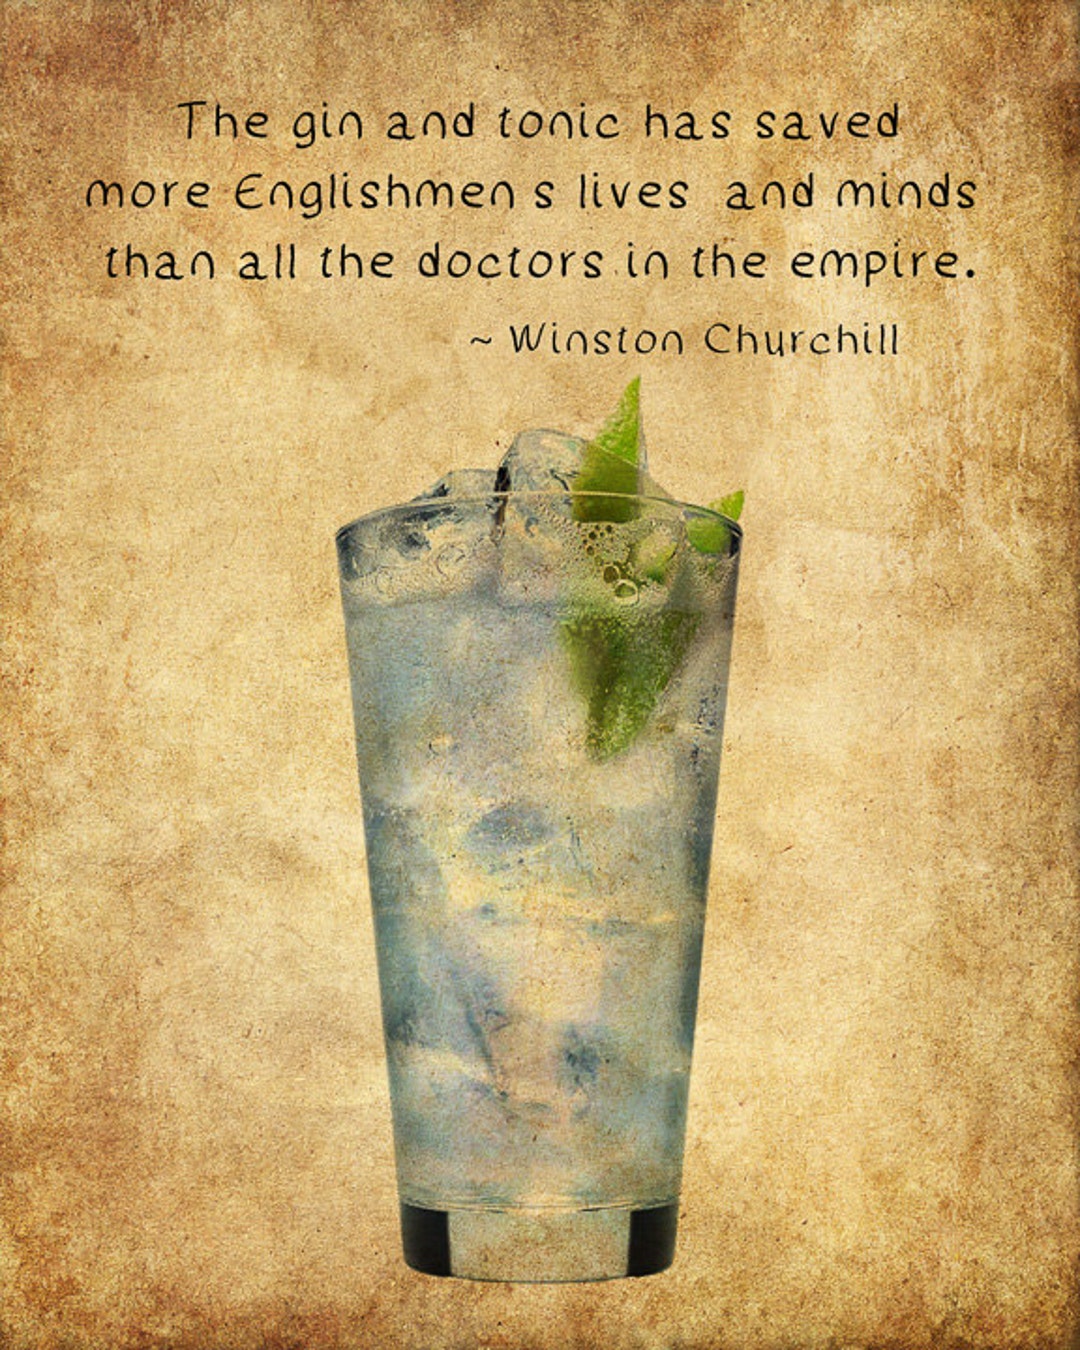 Art and Etsy Art Churchill Print Bar Cocktail vi422 Gin Decor Wall Home - Art Quote Poster Tonic Gin Poster